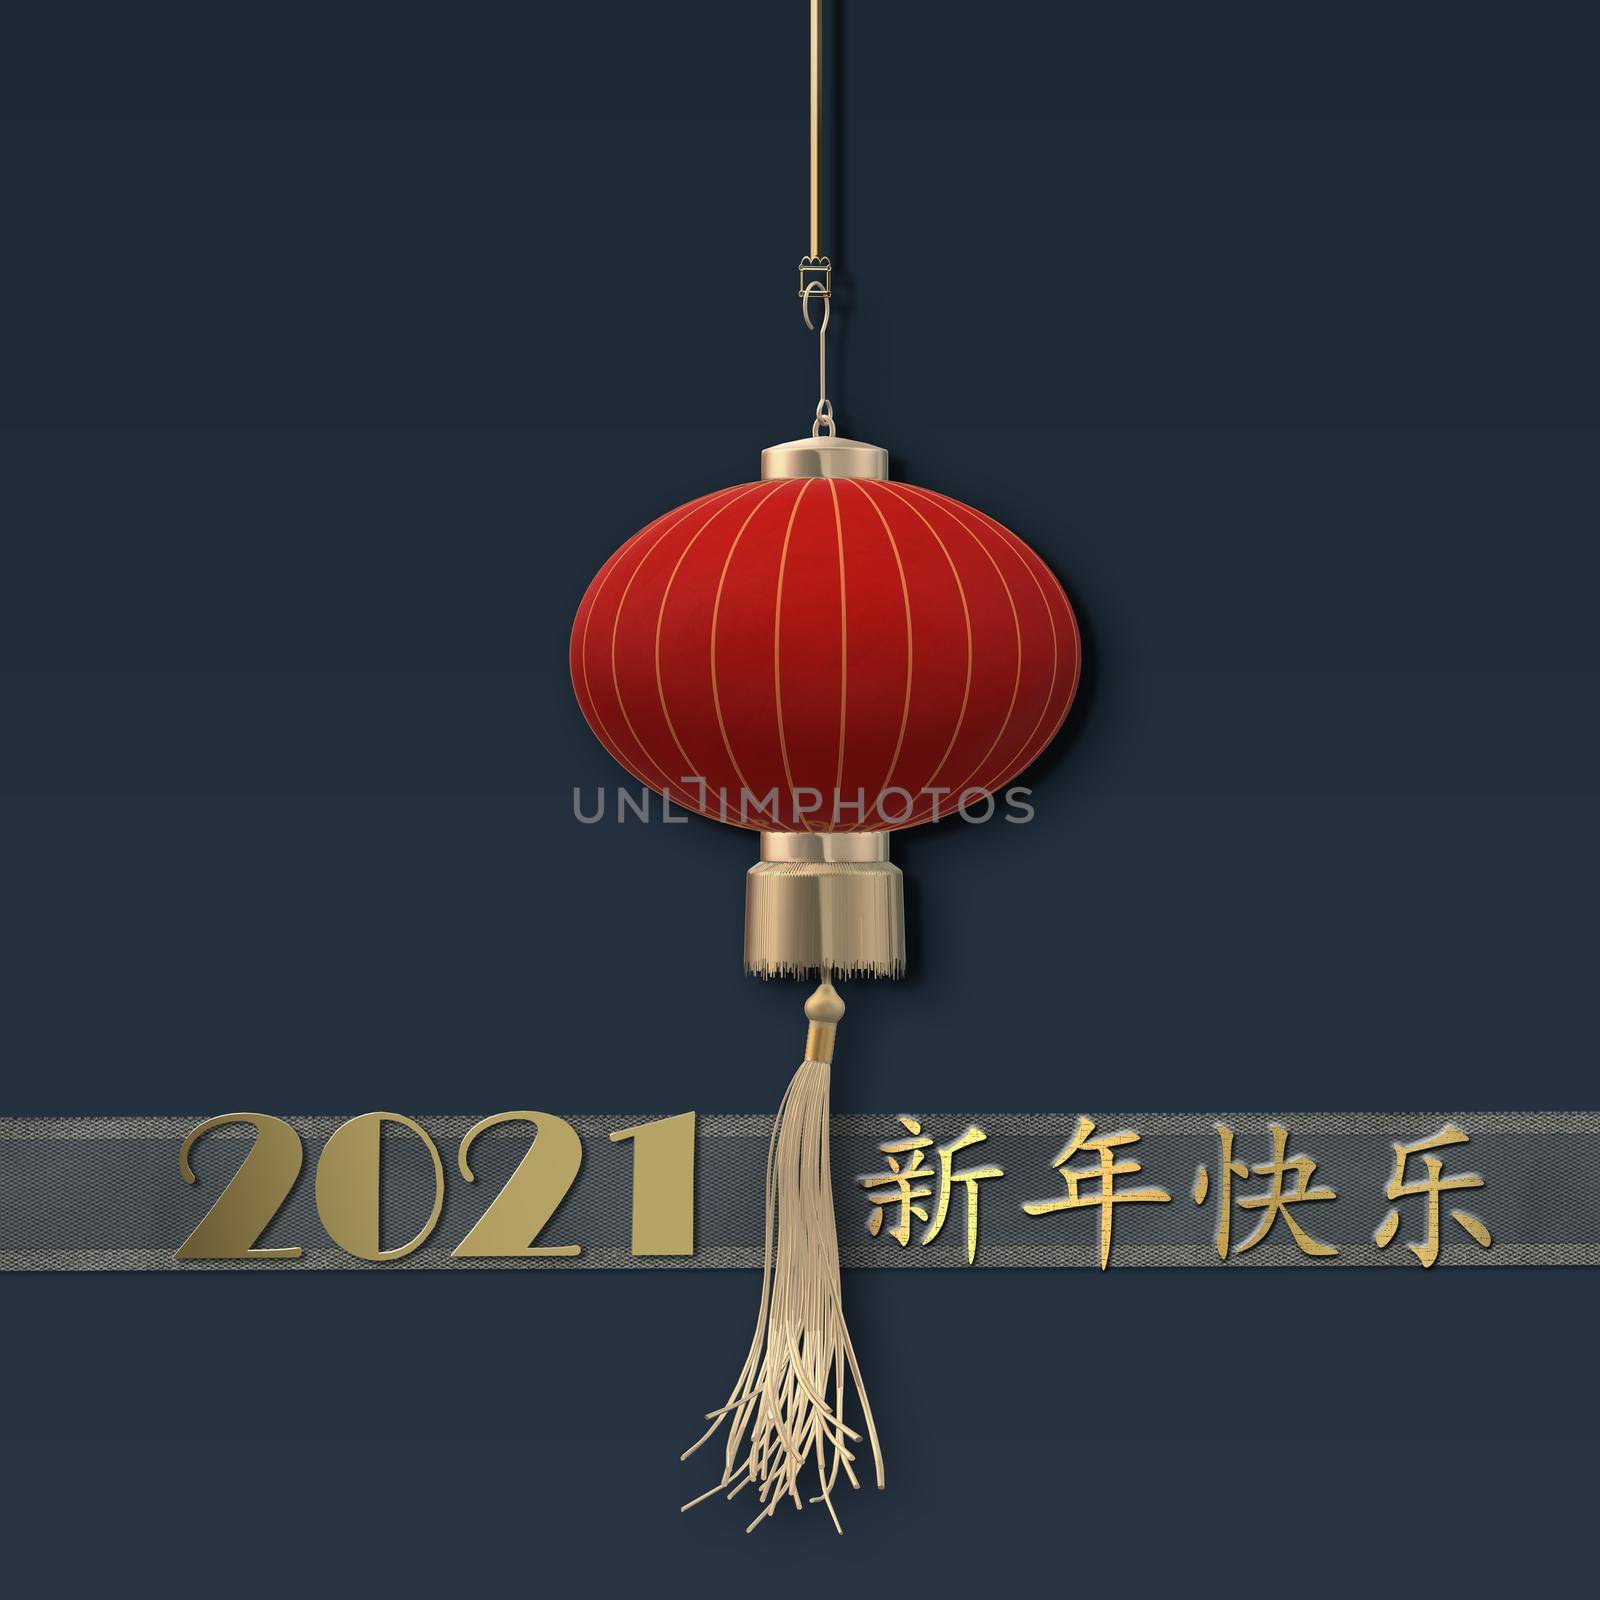 Chinese 2021 New Year design by NelliPolk